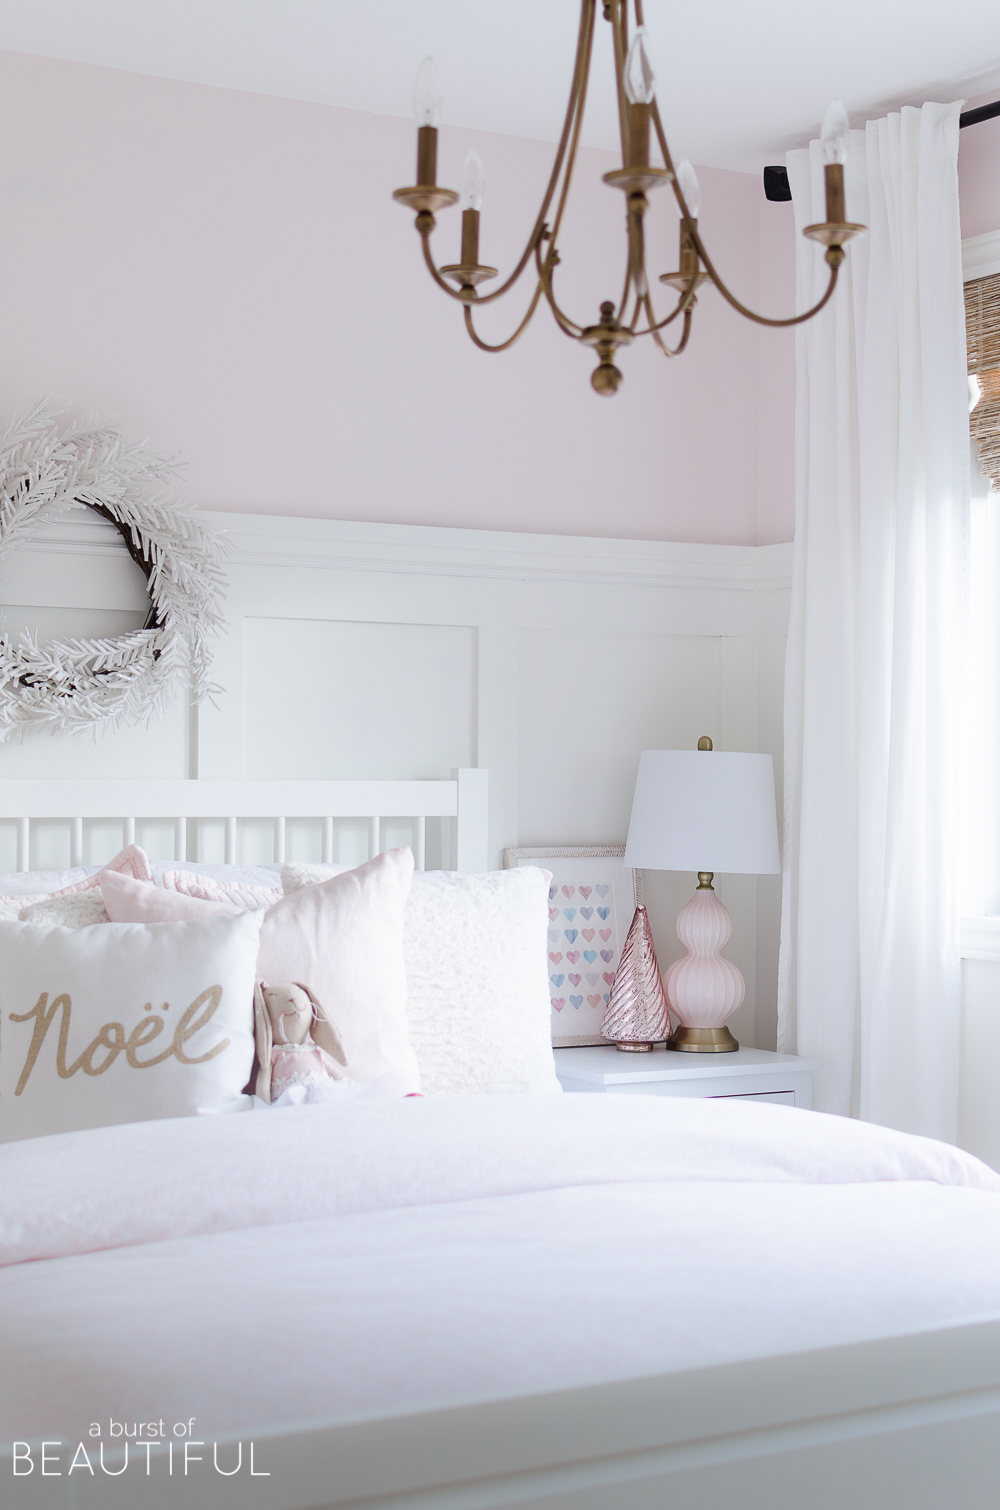 A Pink and White Christmas Bedroom - Nick + Alicia